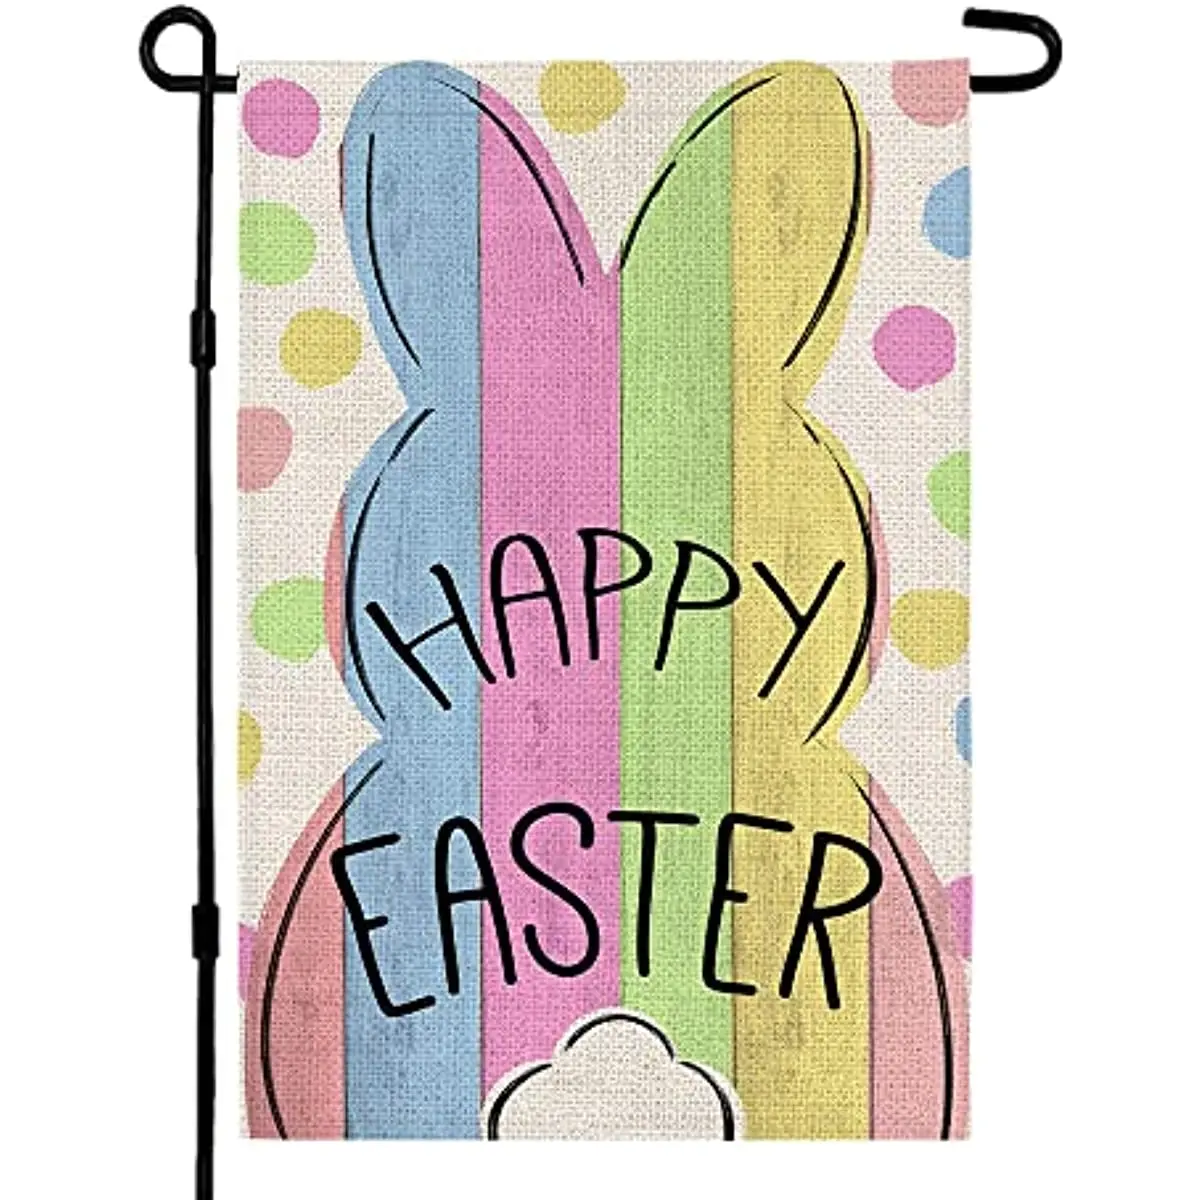 

Happy Easter Stripe Color Bunny Garden Flag 12x18 Inch Double Sided Rabbit Tail Outside Vertical Holiday Yard Decor Banner